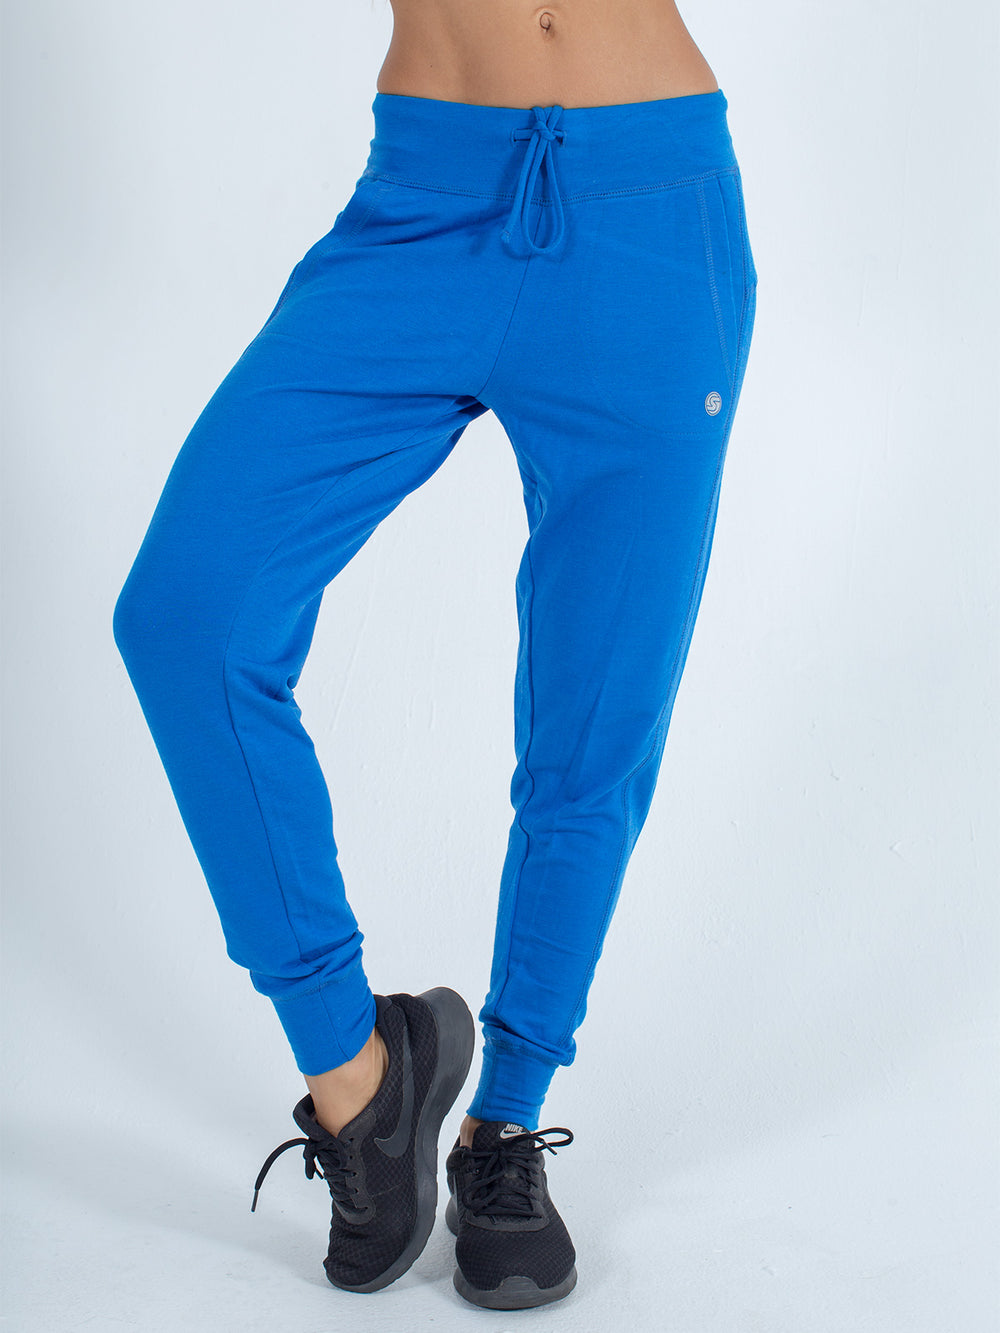 Softie Joggers in Royal Blue